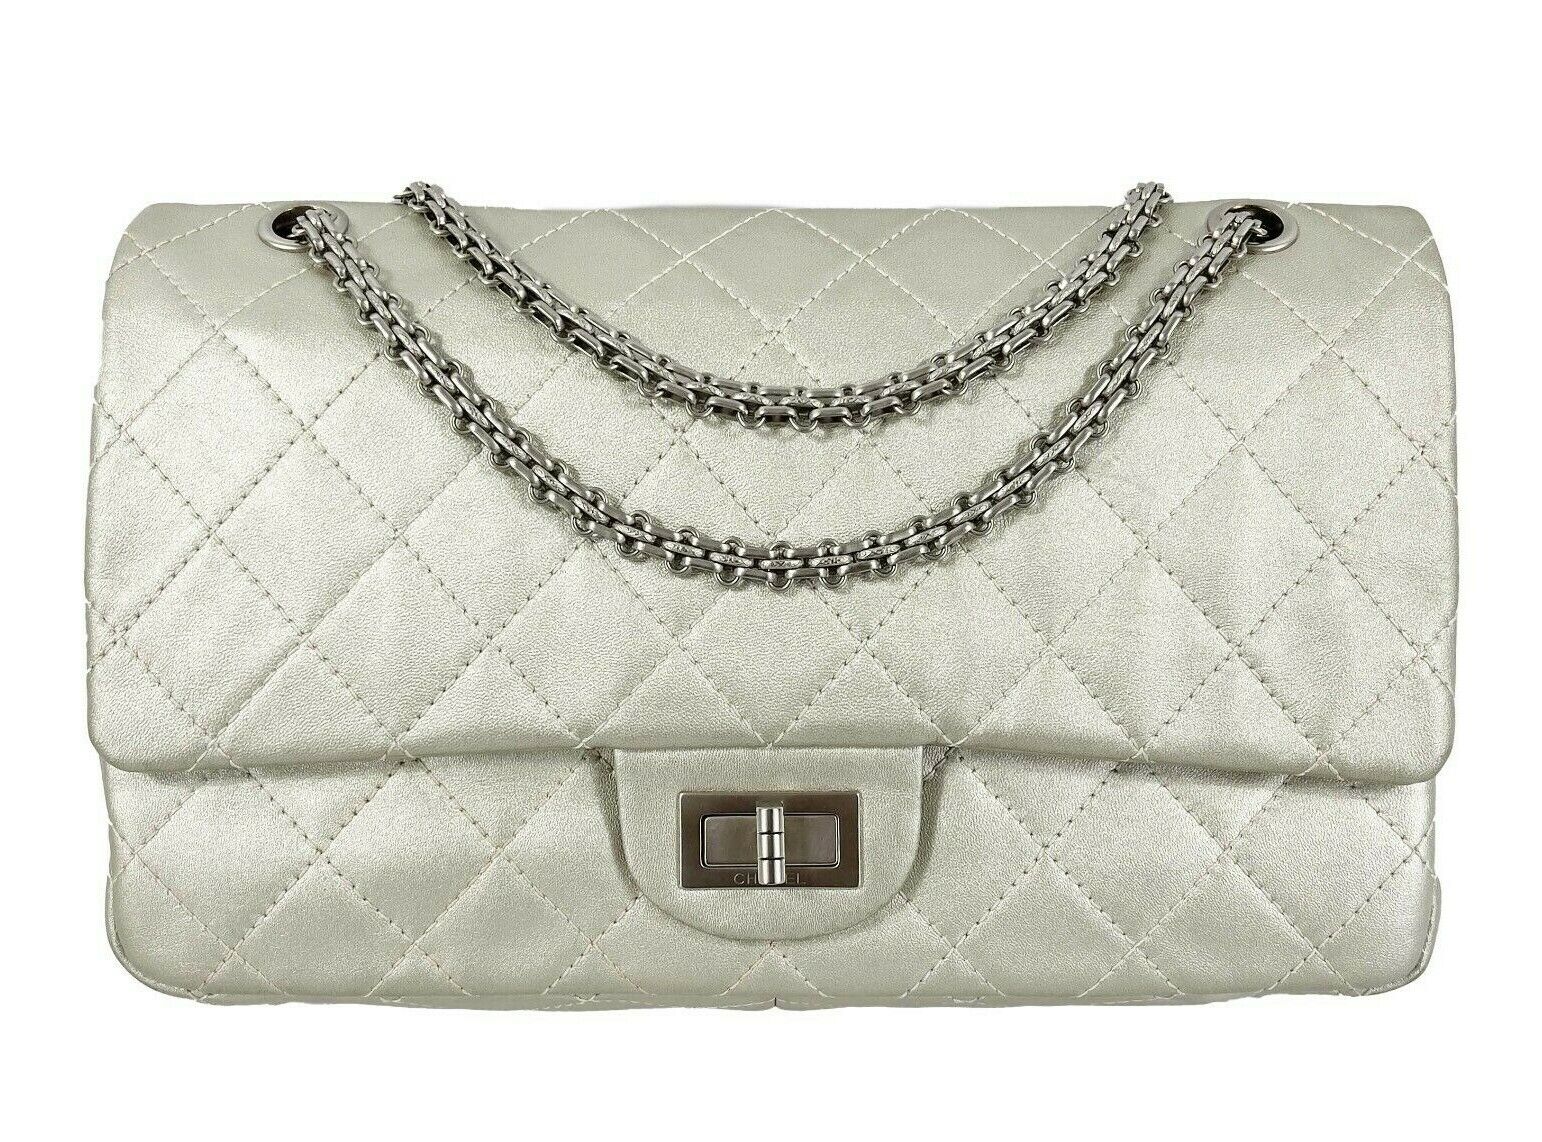 CHANEL - Metallic Calfskin Quilted 2.55 Reissue 227 Double Flap - Shou